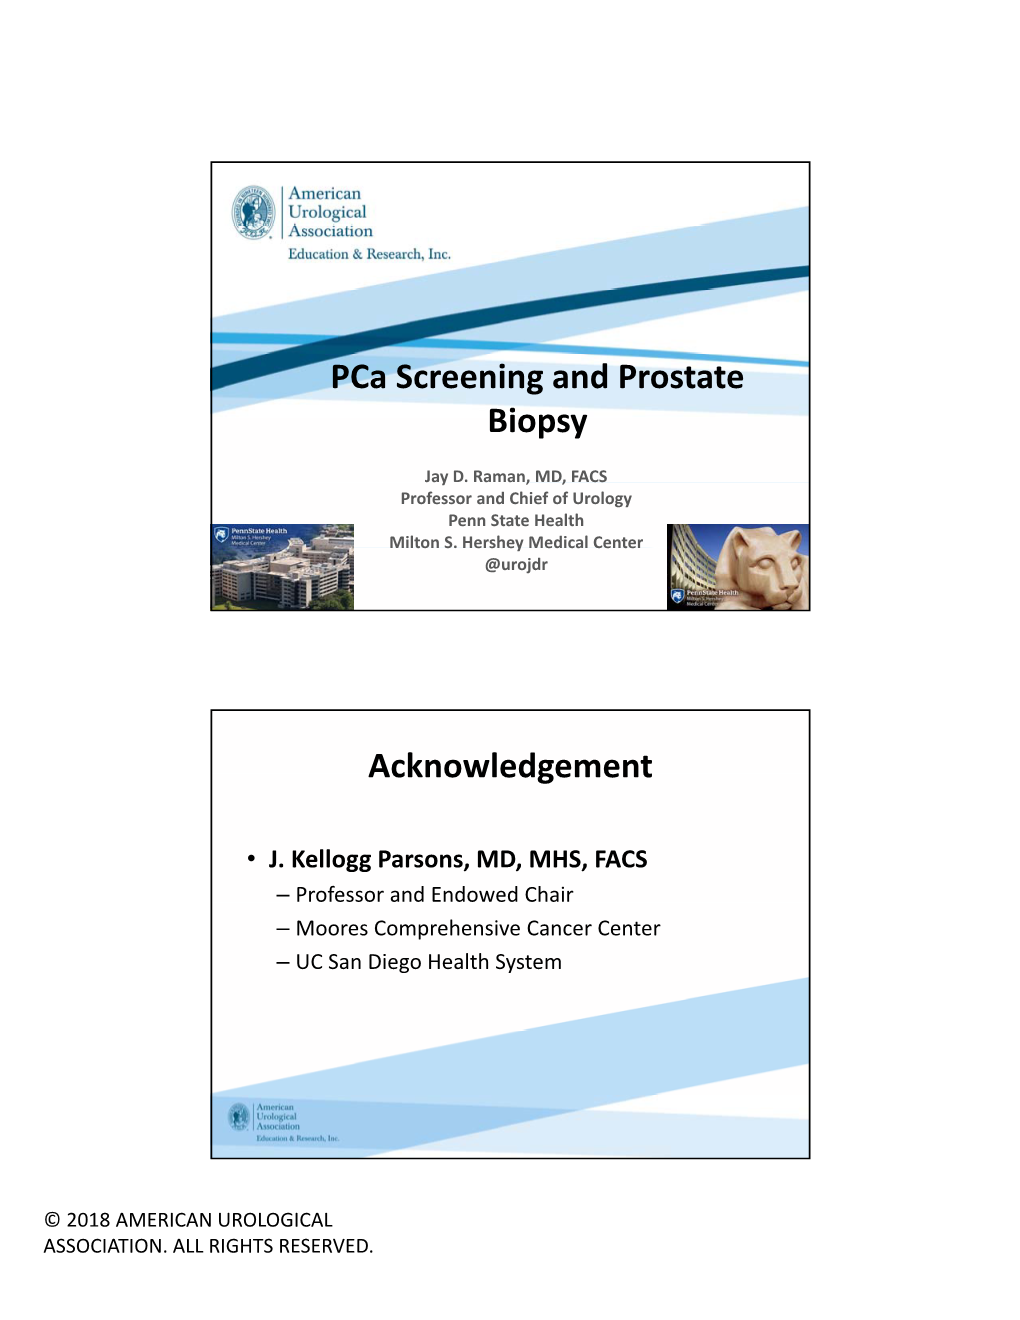 Pca Screening and Prostate Biopsy